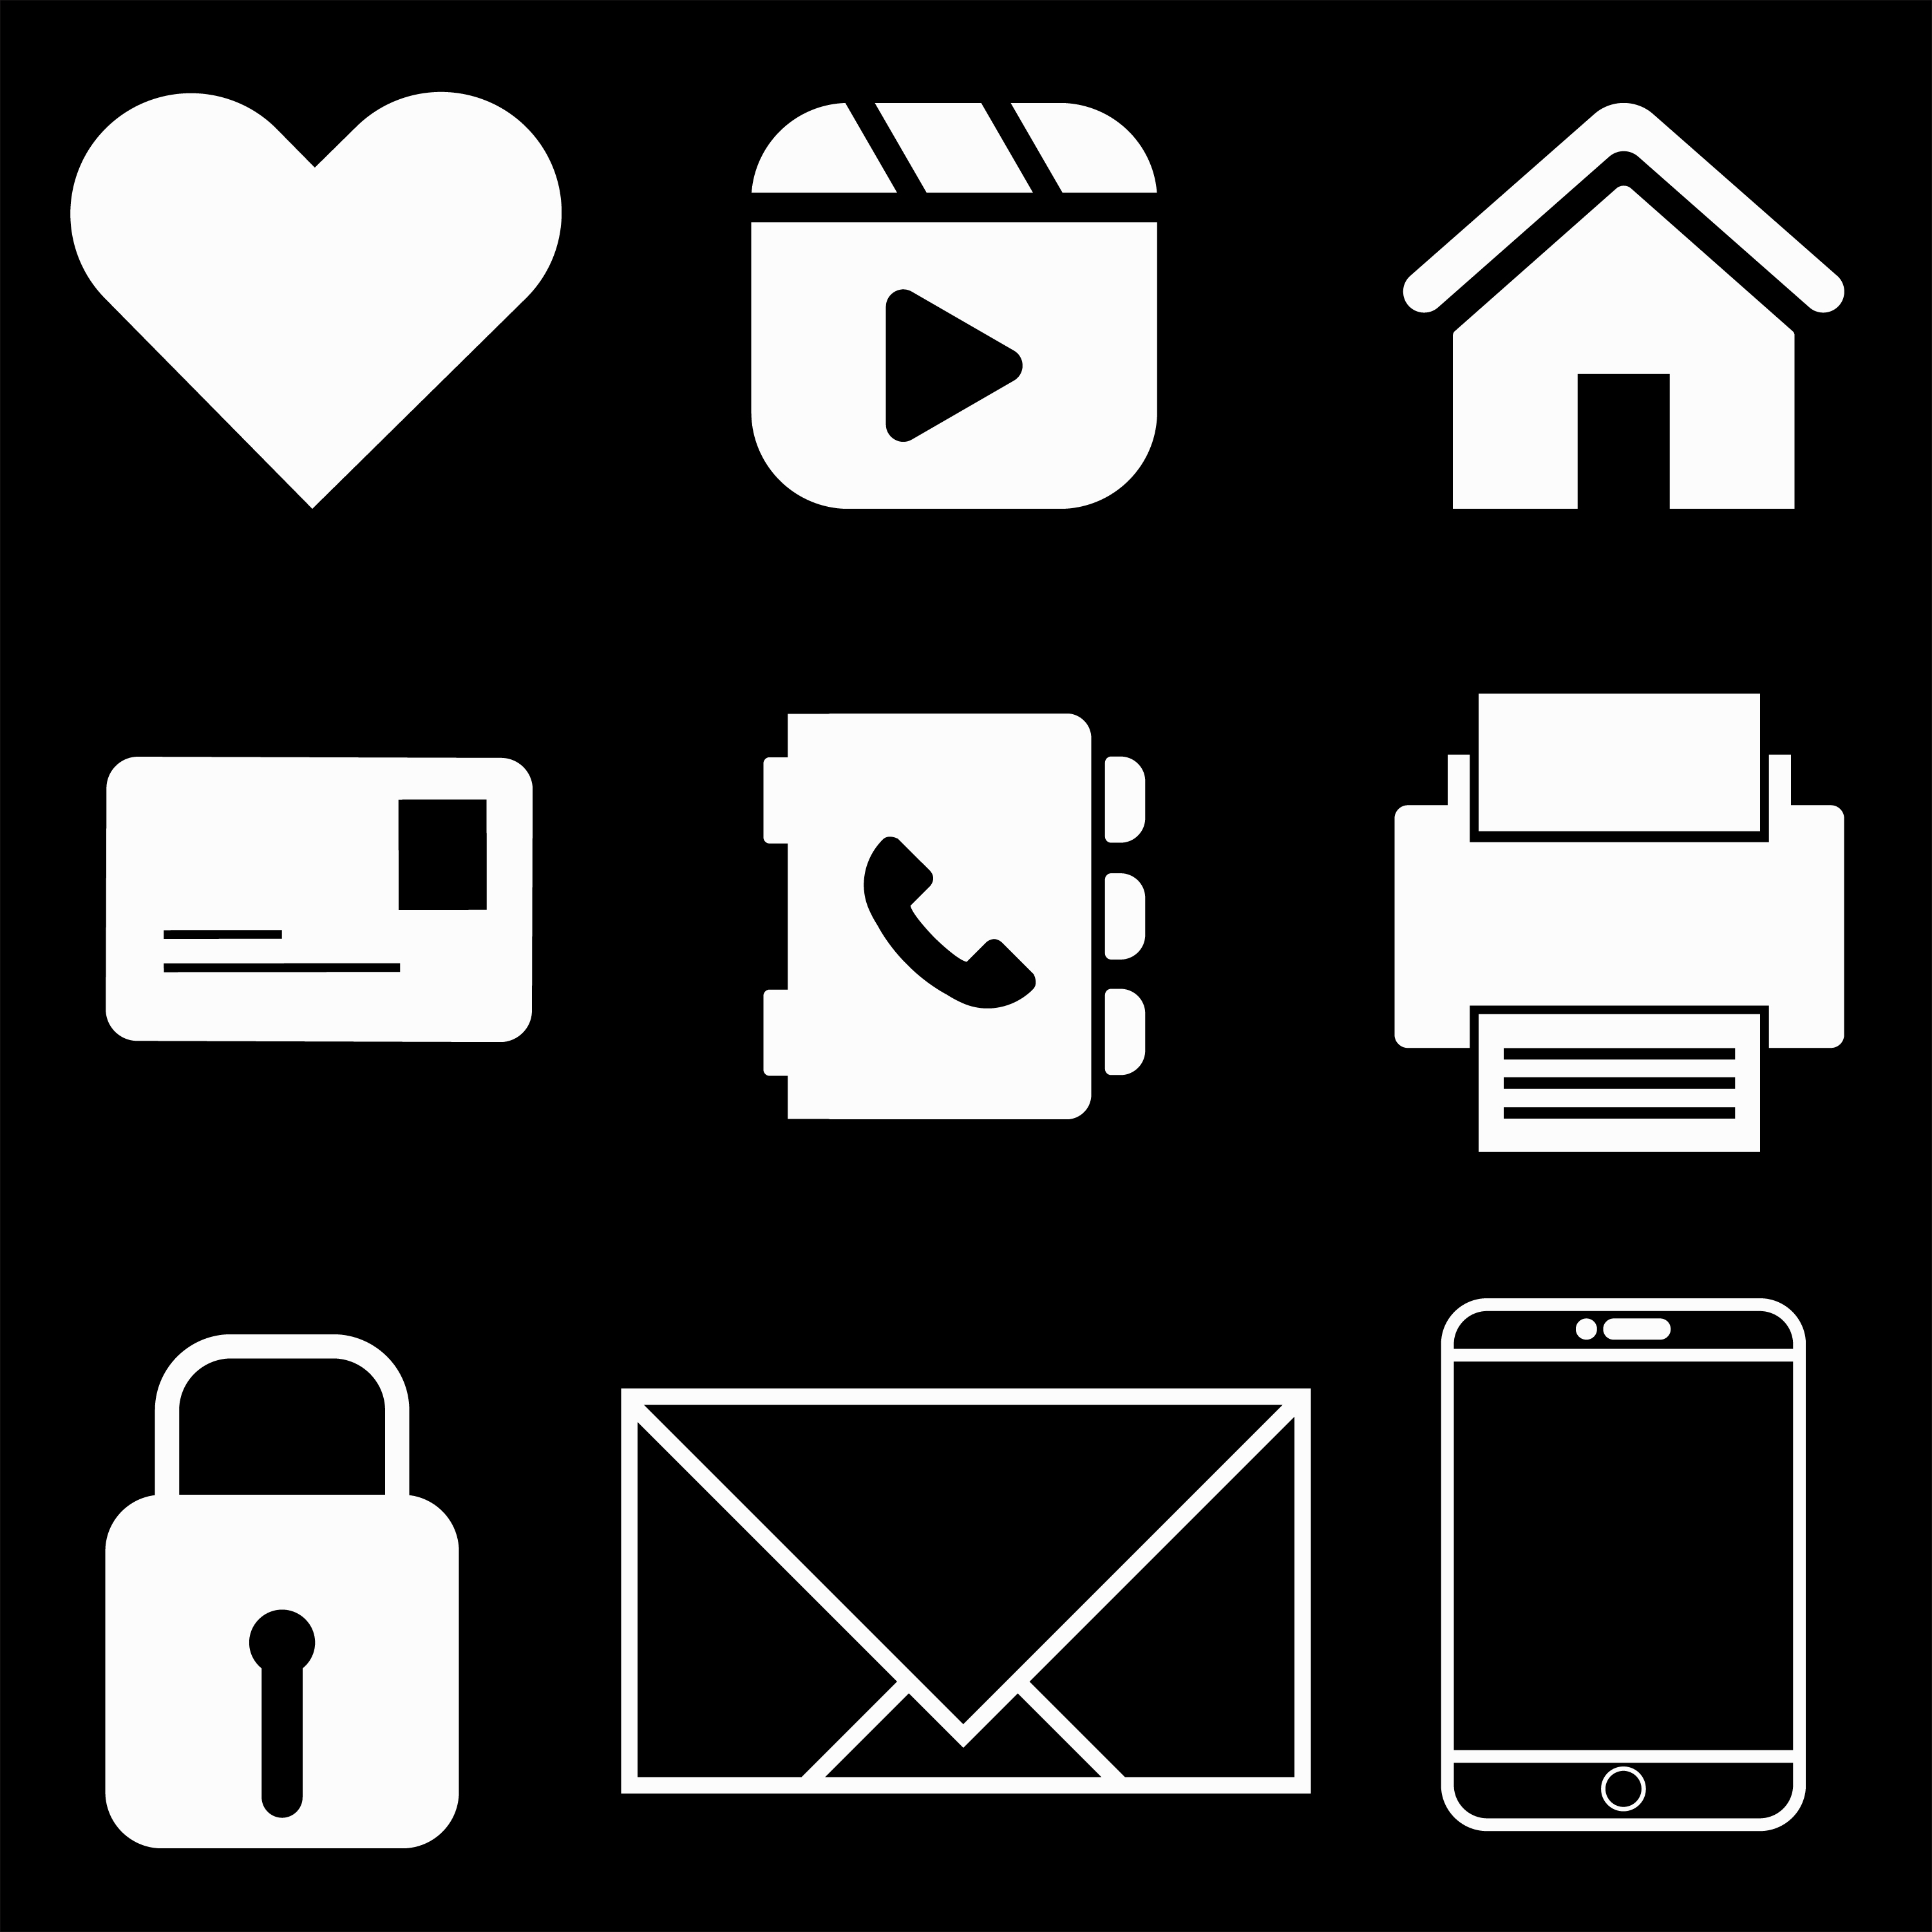 9 Premium HD Vector Icons on the dark background.